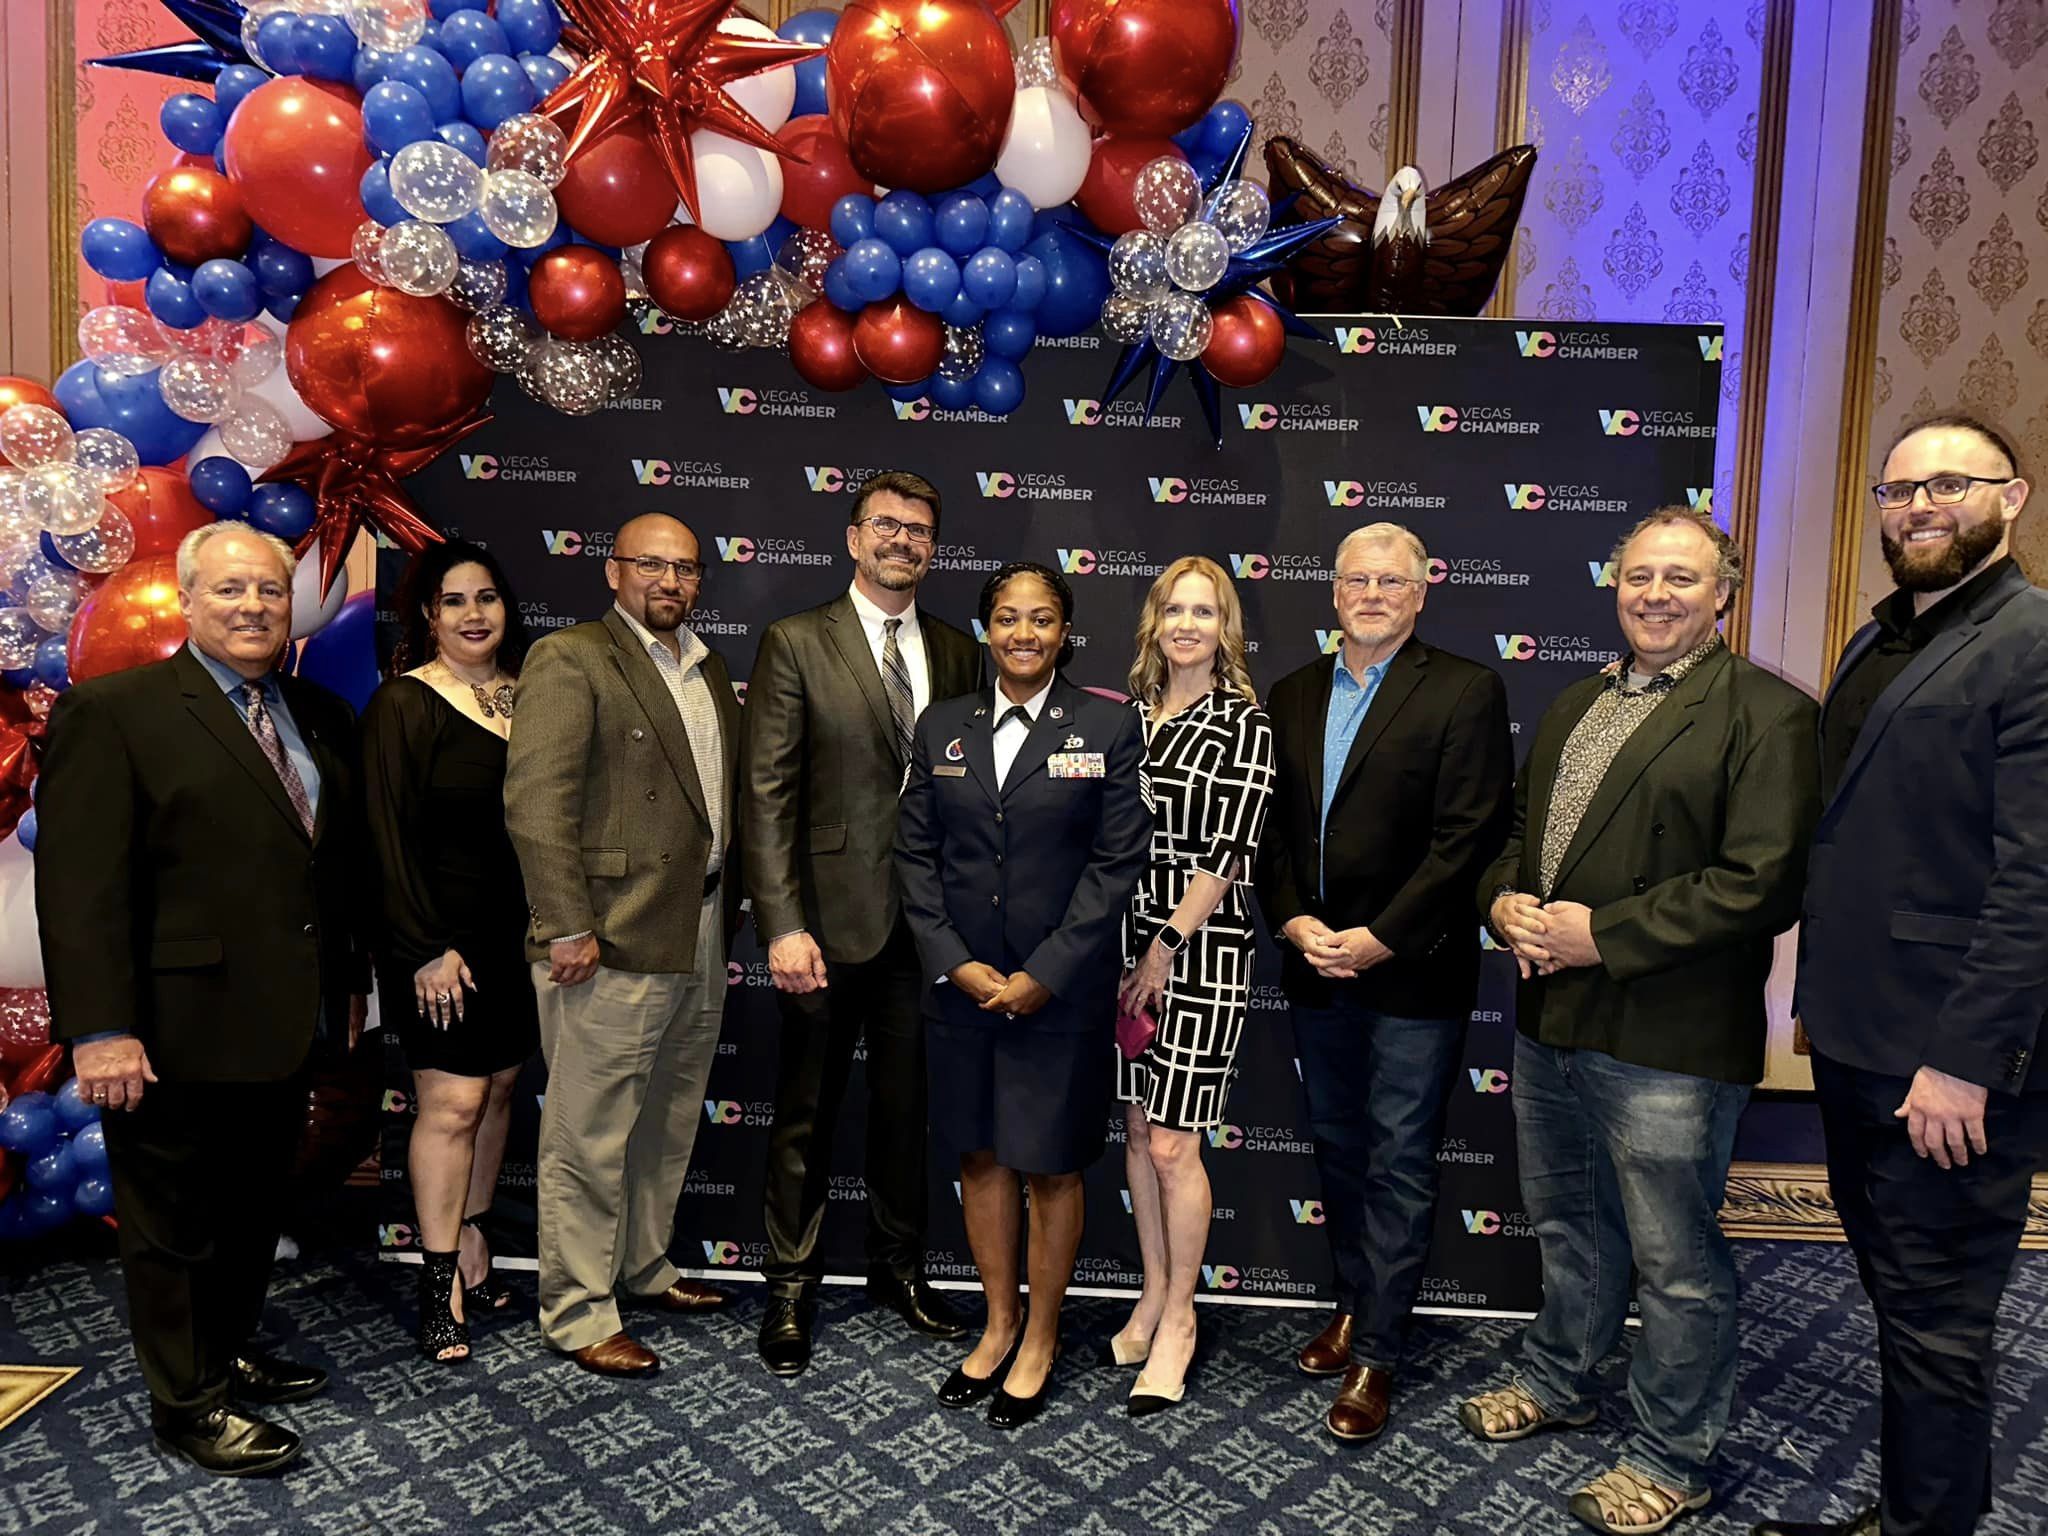 group of men and women in front of red, white and blue balloons and background at awards dinner